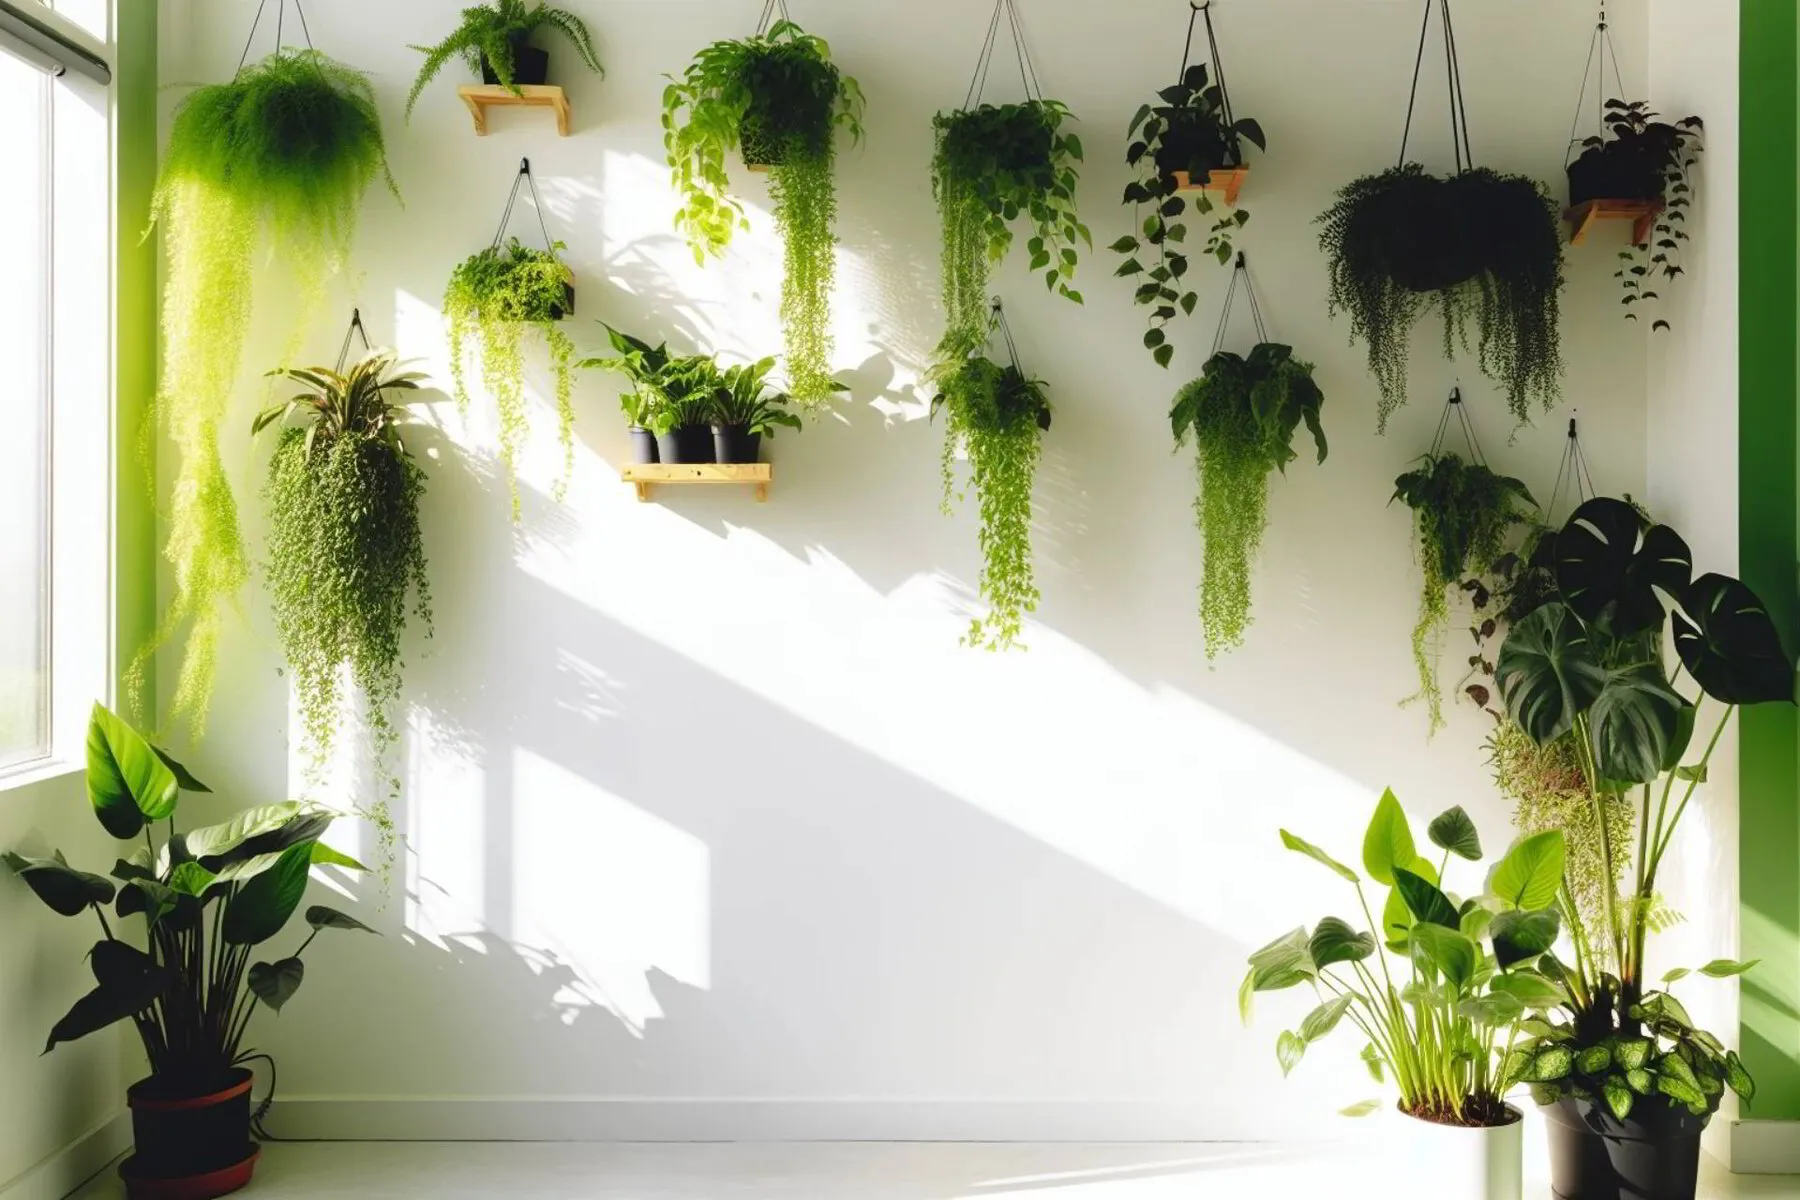 Plants as wall decor in a well lit room